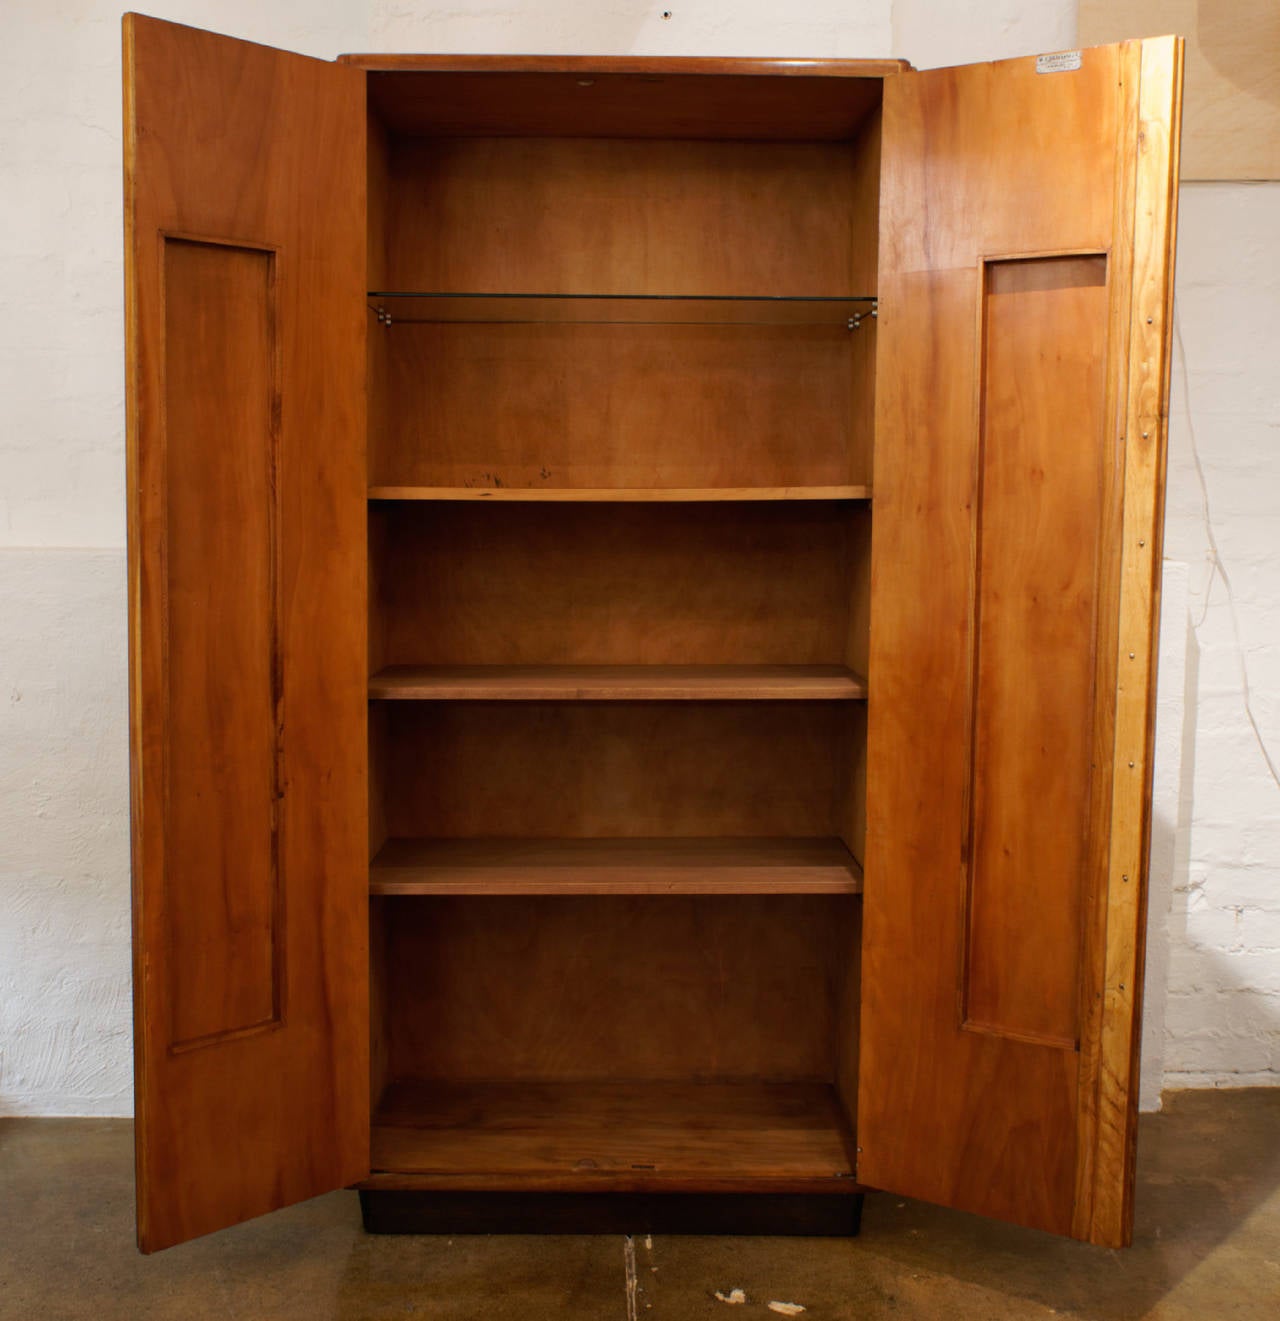 Tall modernist oak cupboard manufactured by R Cabellini & Co, Como, Italy. Makers plate on inside of door. One glass shelf and three wooden shelves, original brass key, circa 1930.